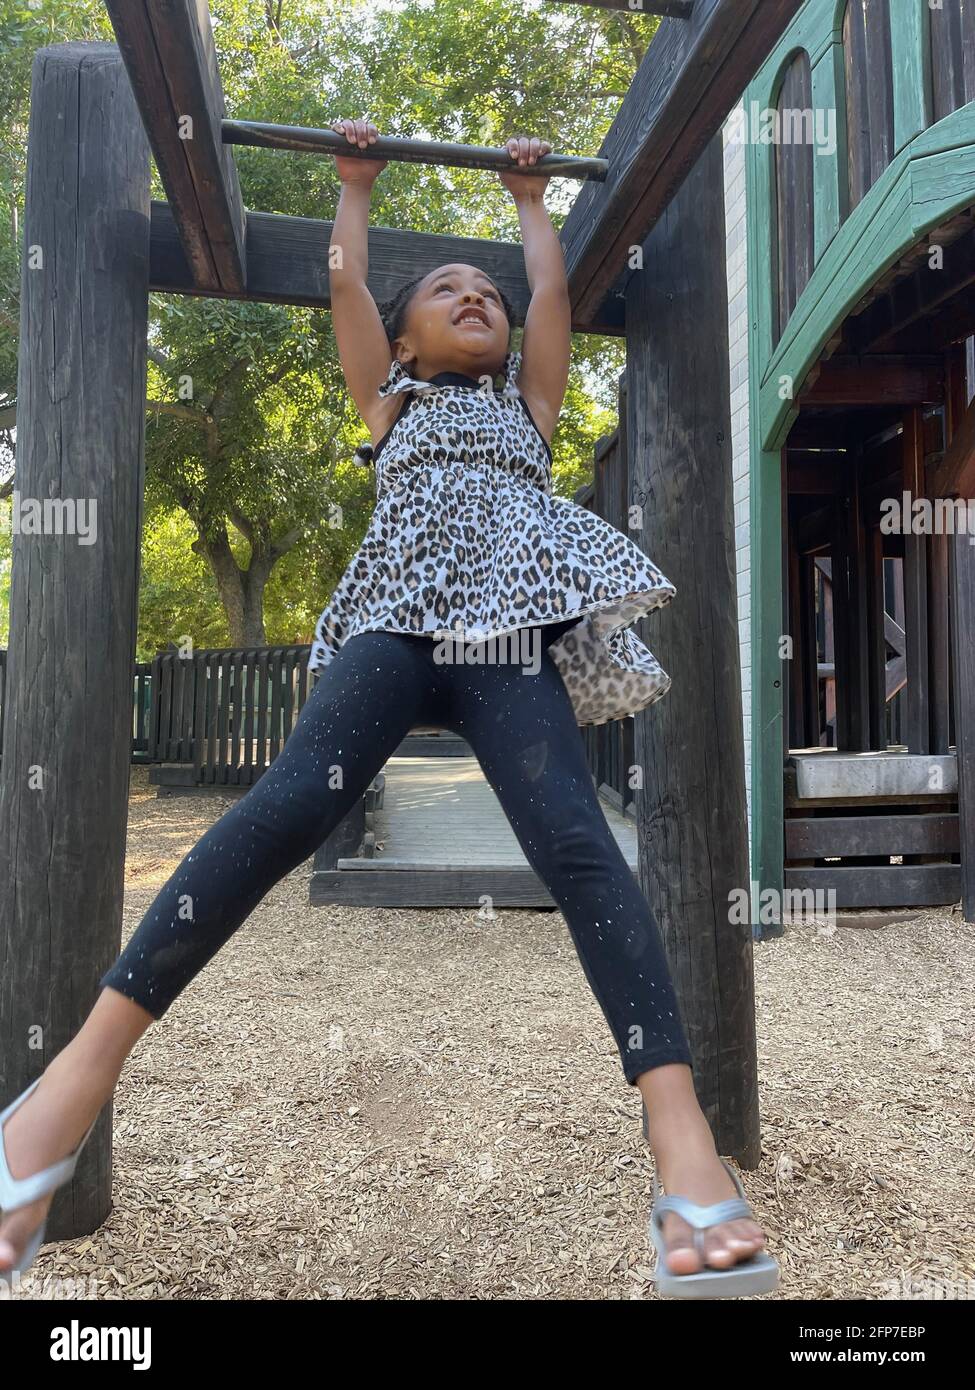 vertical shot of a young black girl swinging from monkey bars in a children's playground Stock Photo